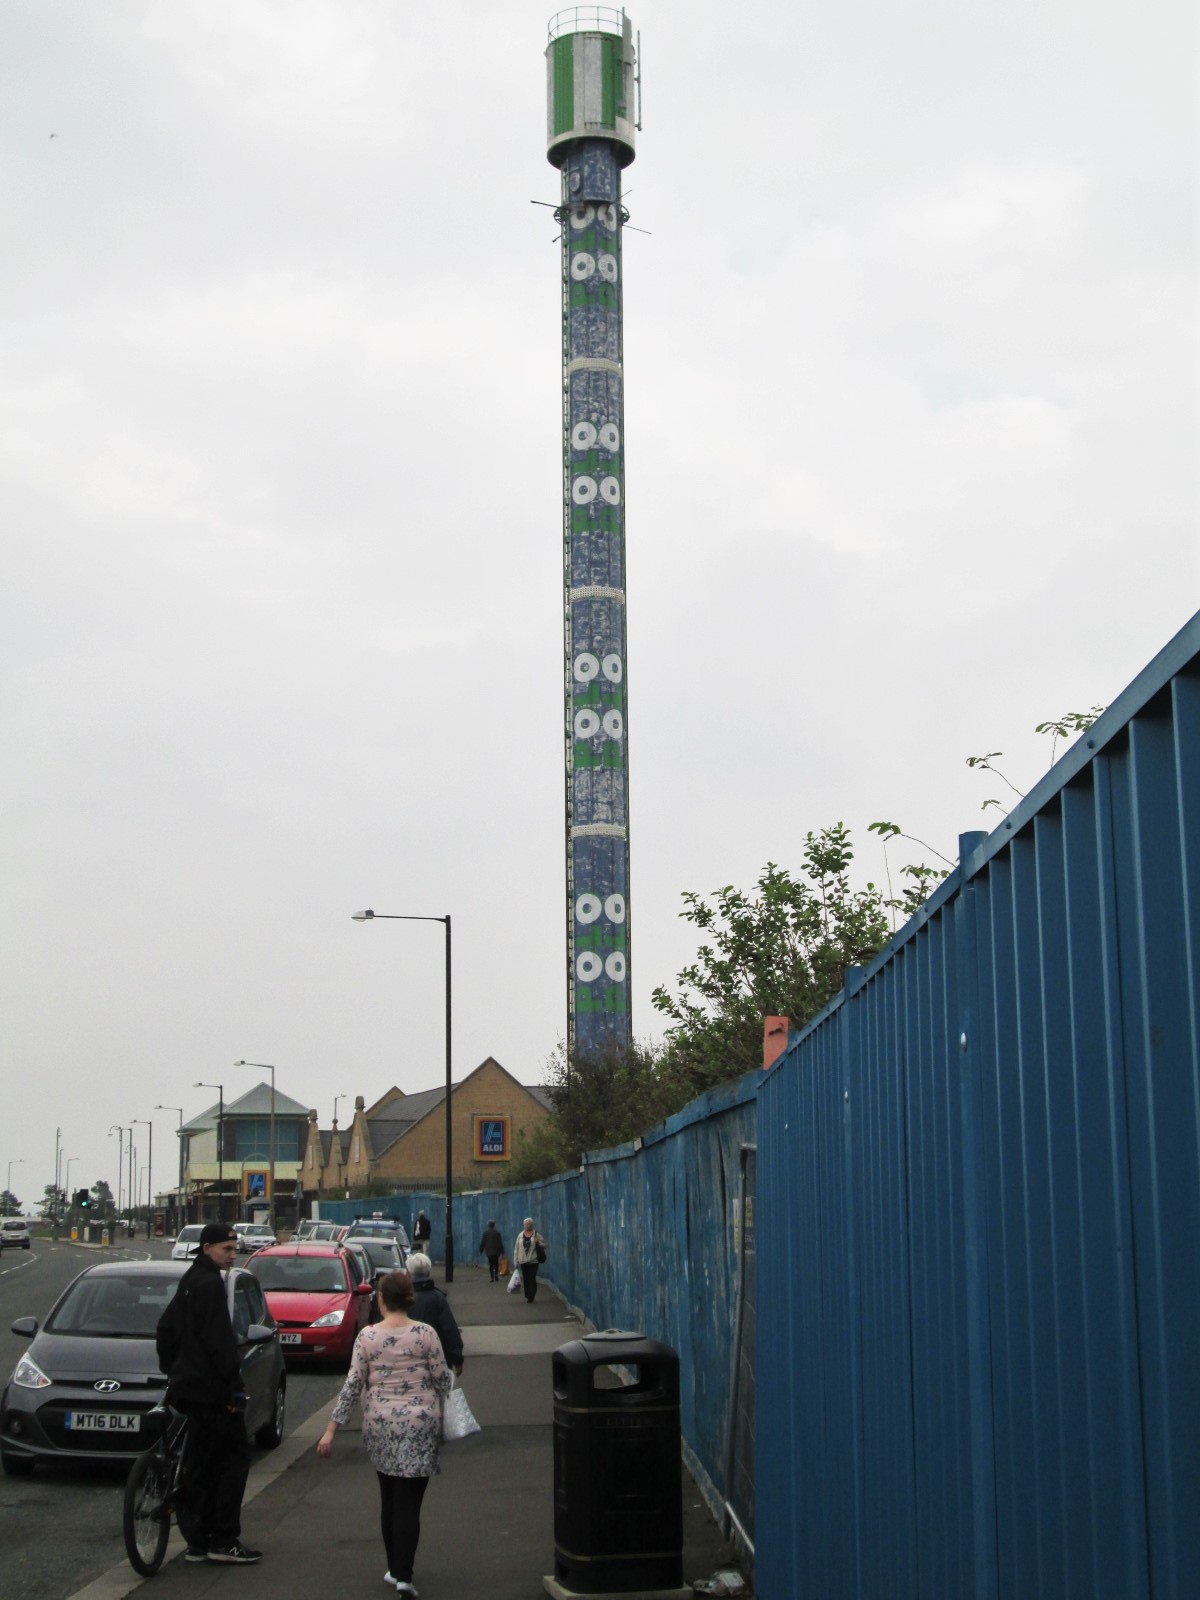 The Polo tower